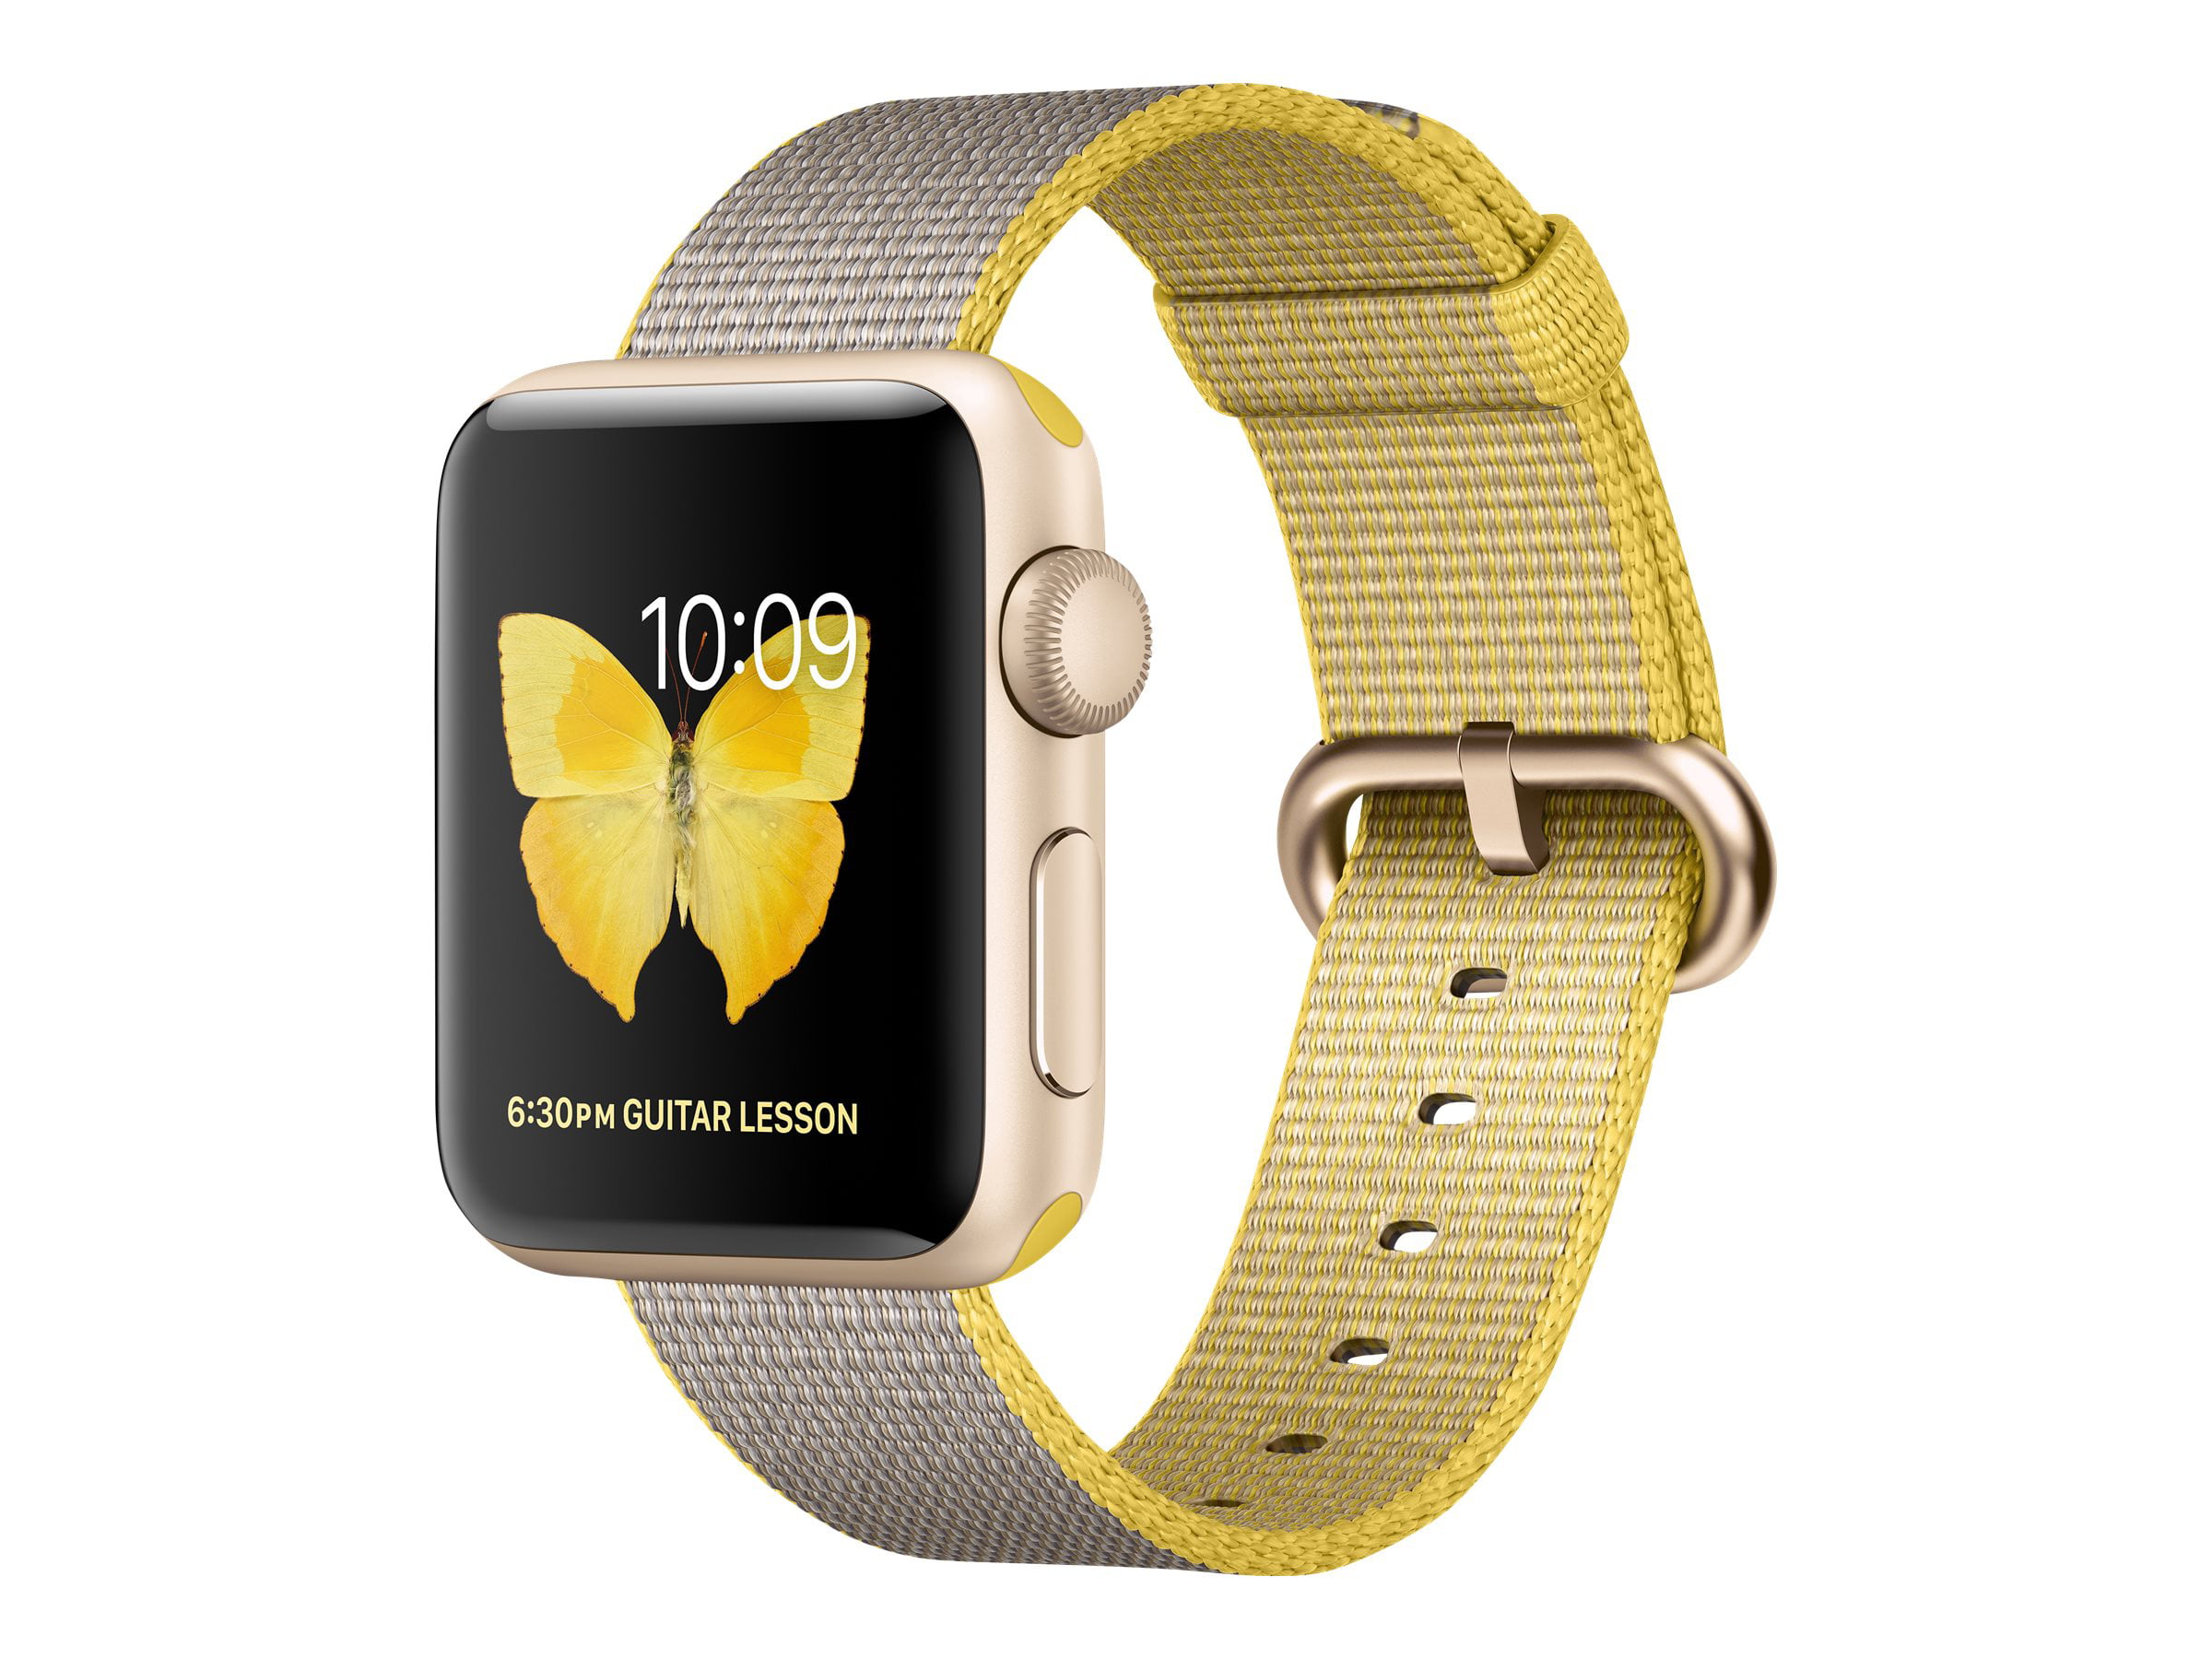 Apple - Apple Watch Series 2 - 38 mm - gold aluminum - smart watch with